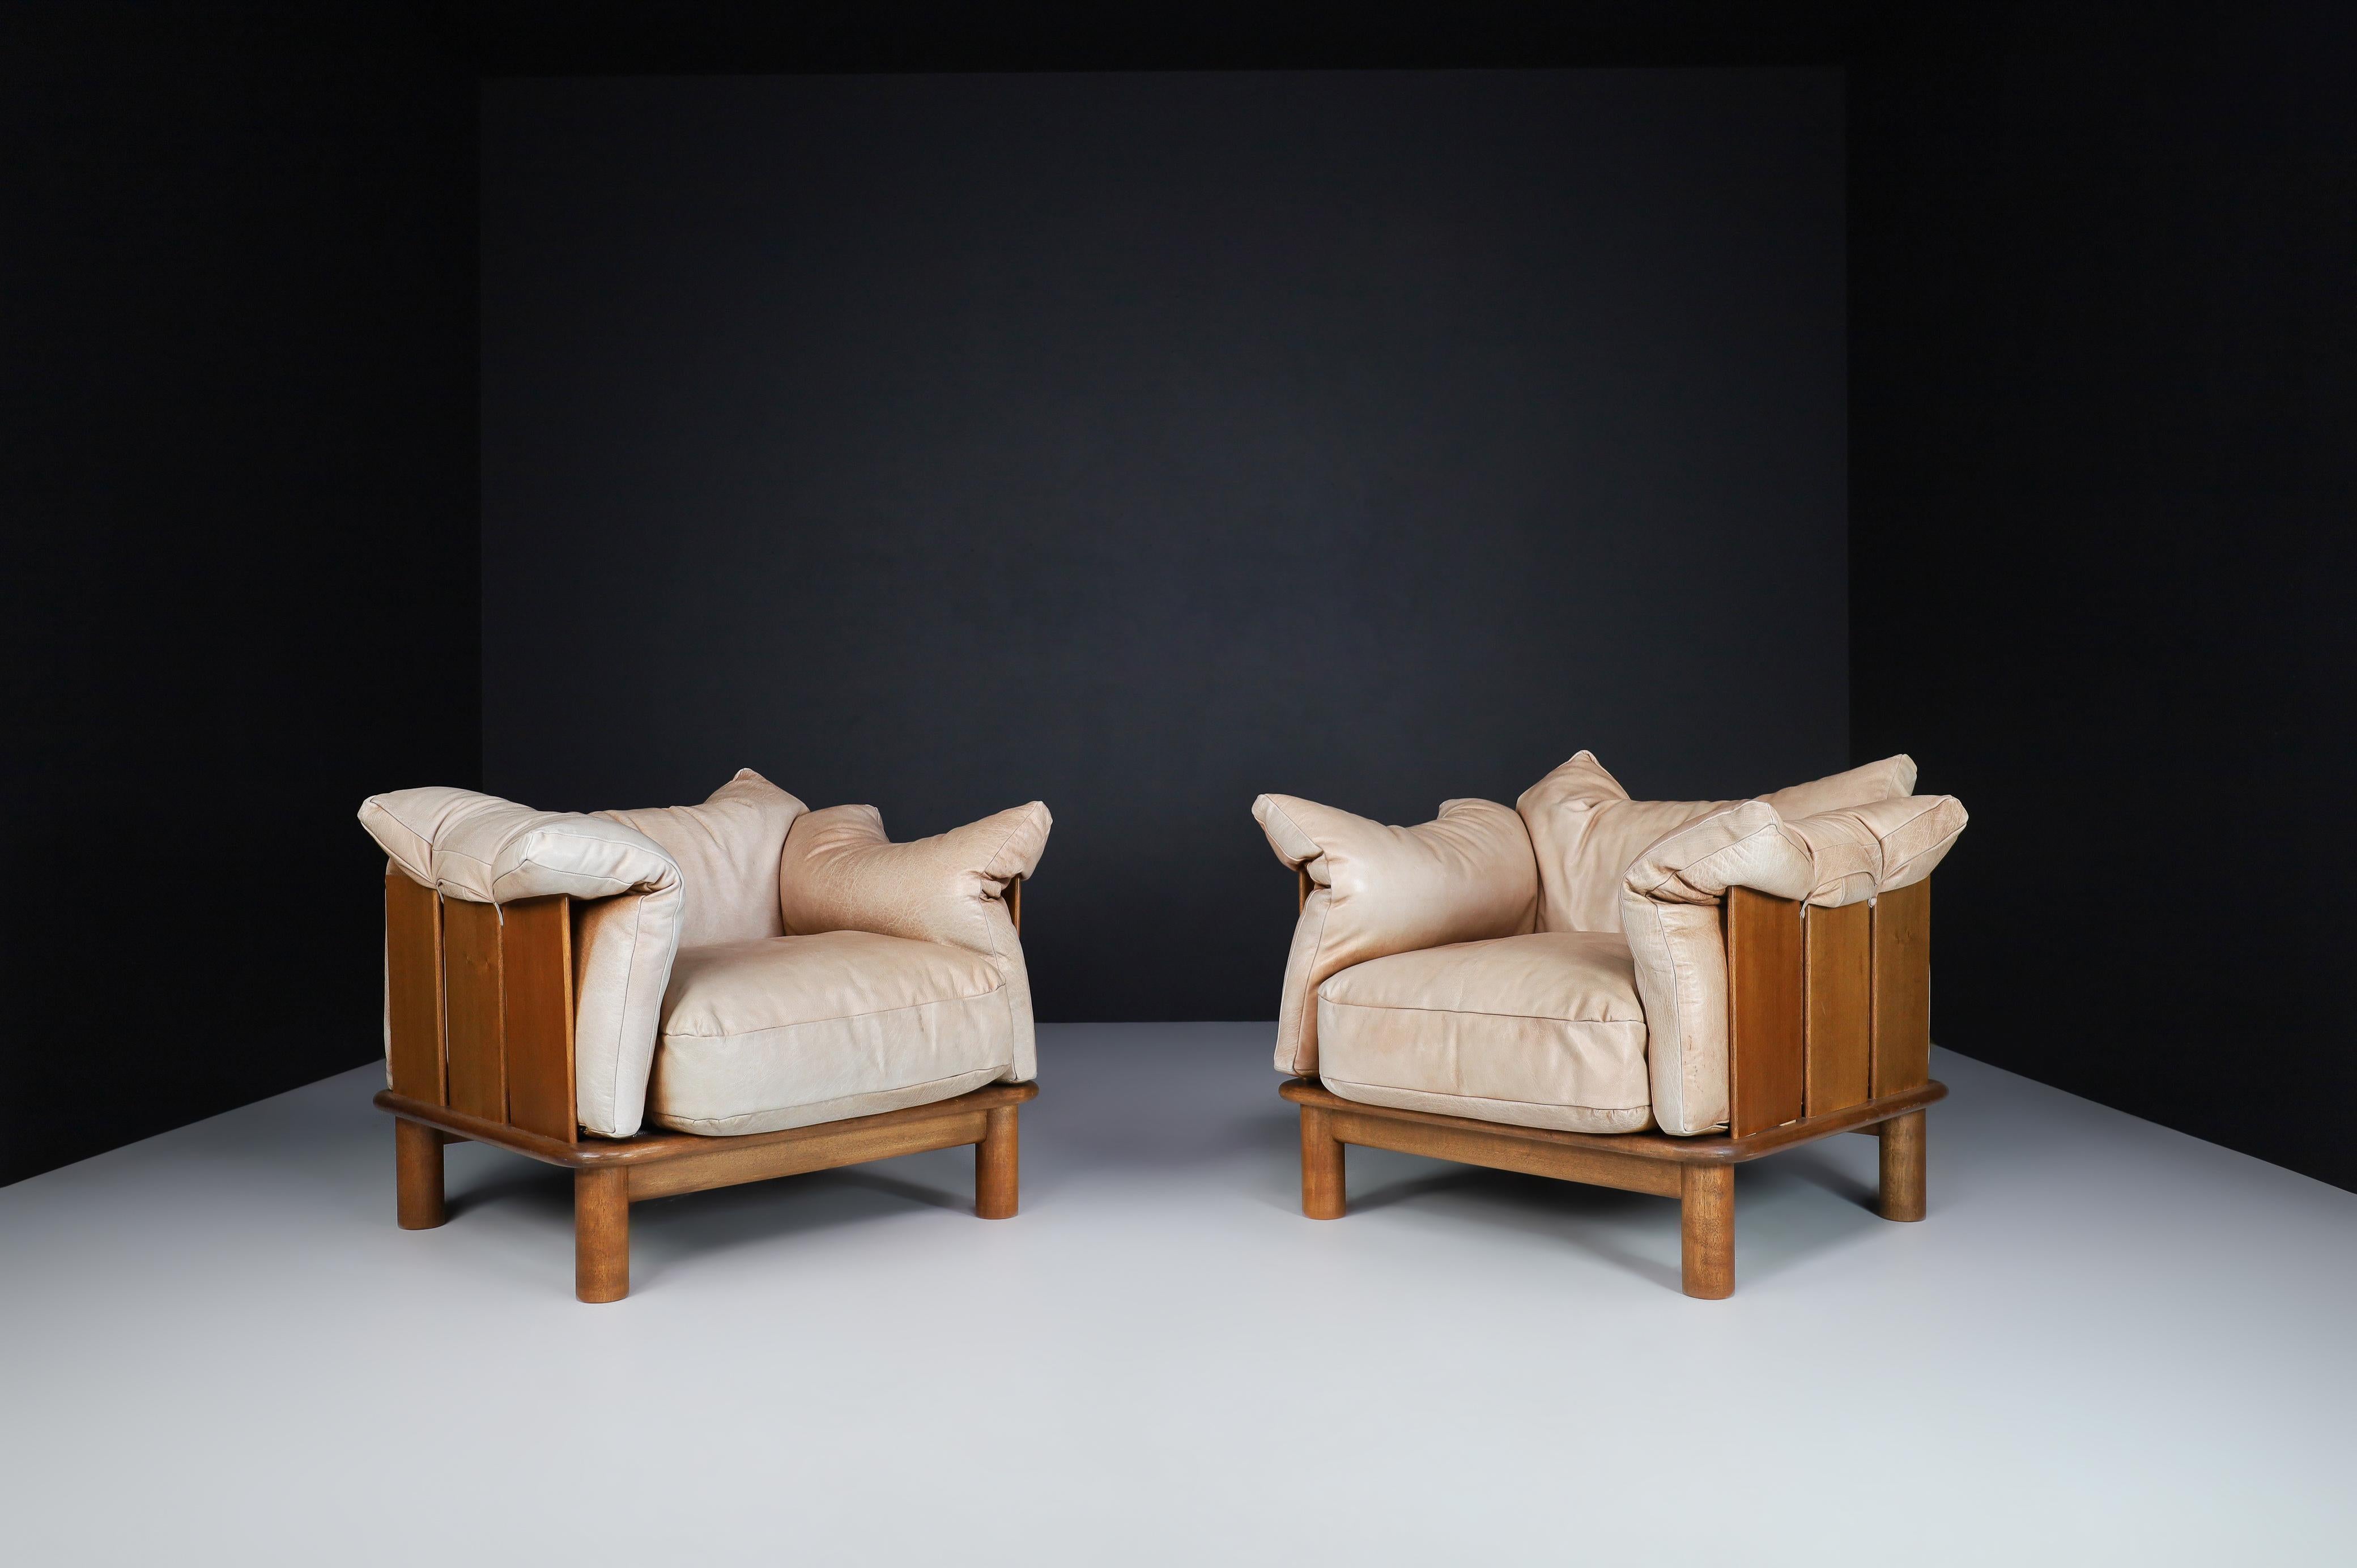 Mid-Century Modern pair of two lounge chairs, patinated camel leather, walnut, De Pas, D'Urbino & Lomazzi, Padova, Italy 1970s

Comfortable and gorgeous seating pieces by these Italian masters. The patina of the leather is just how we like it to